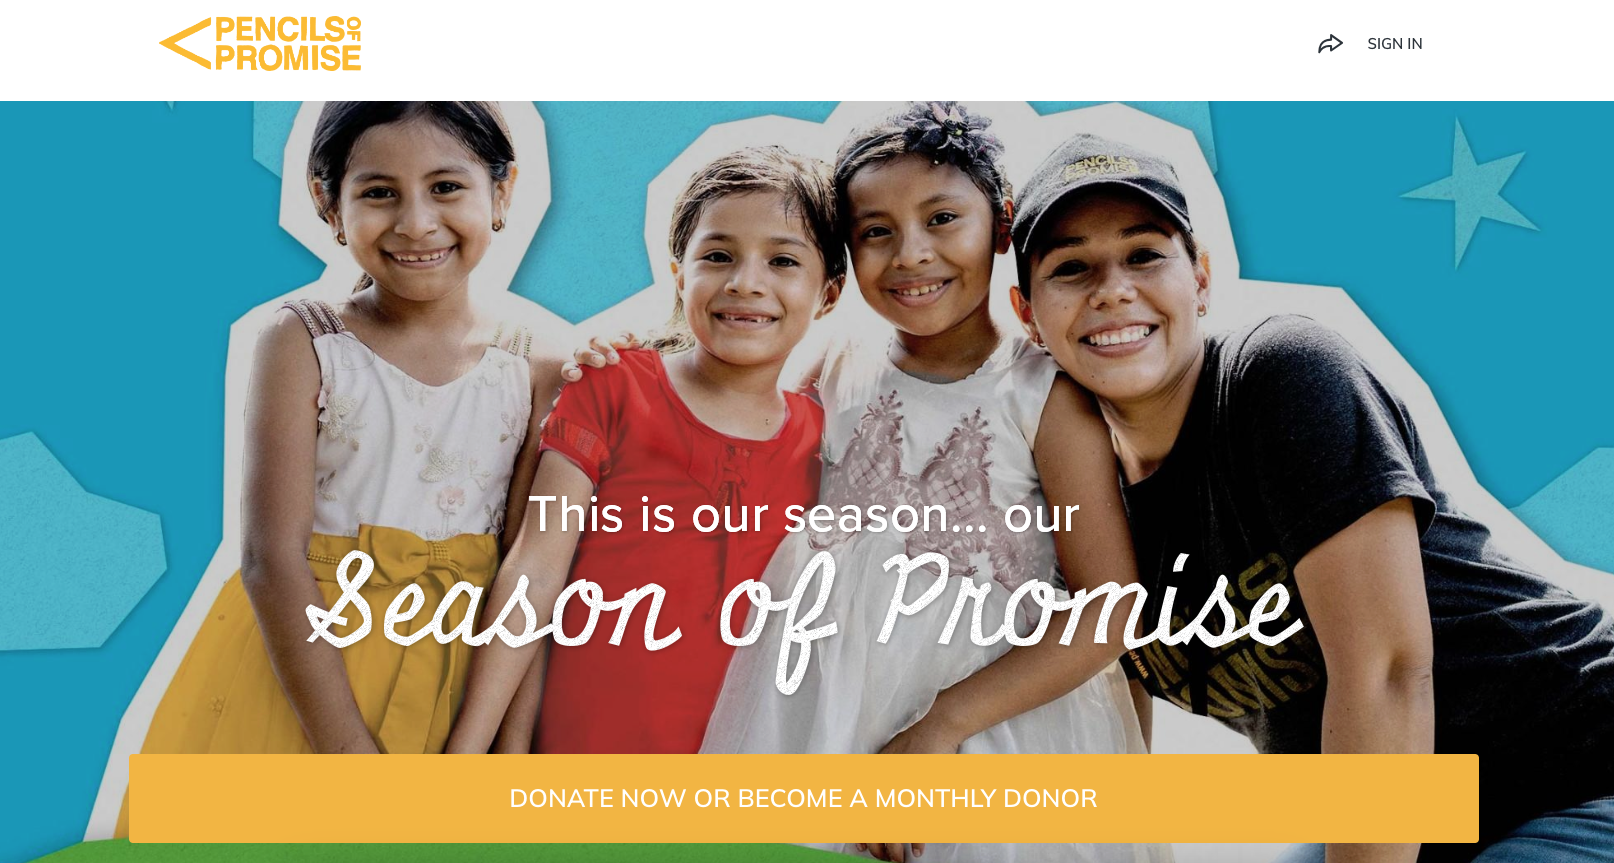 Pencils of Promise Year-End Campaign